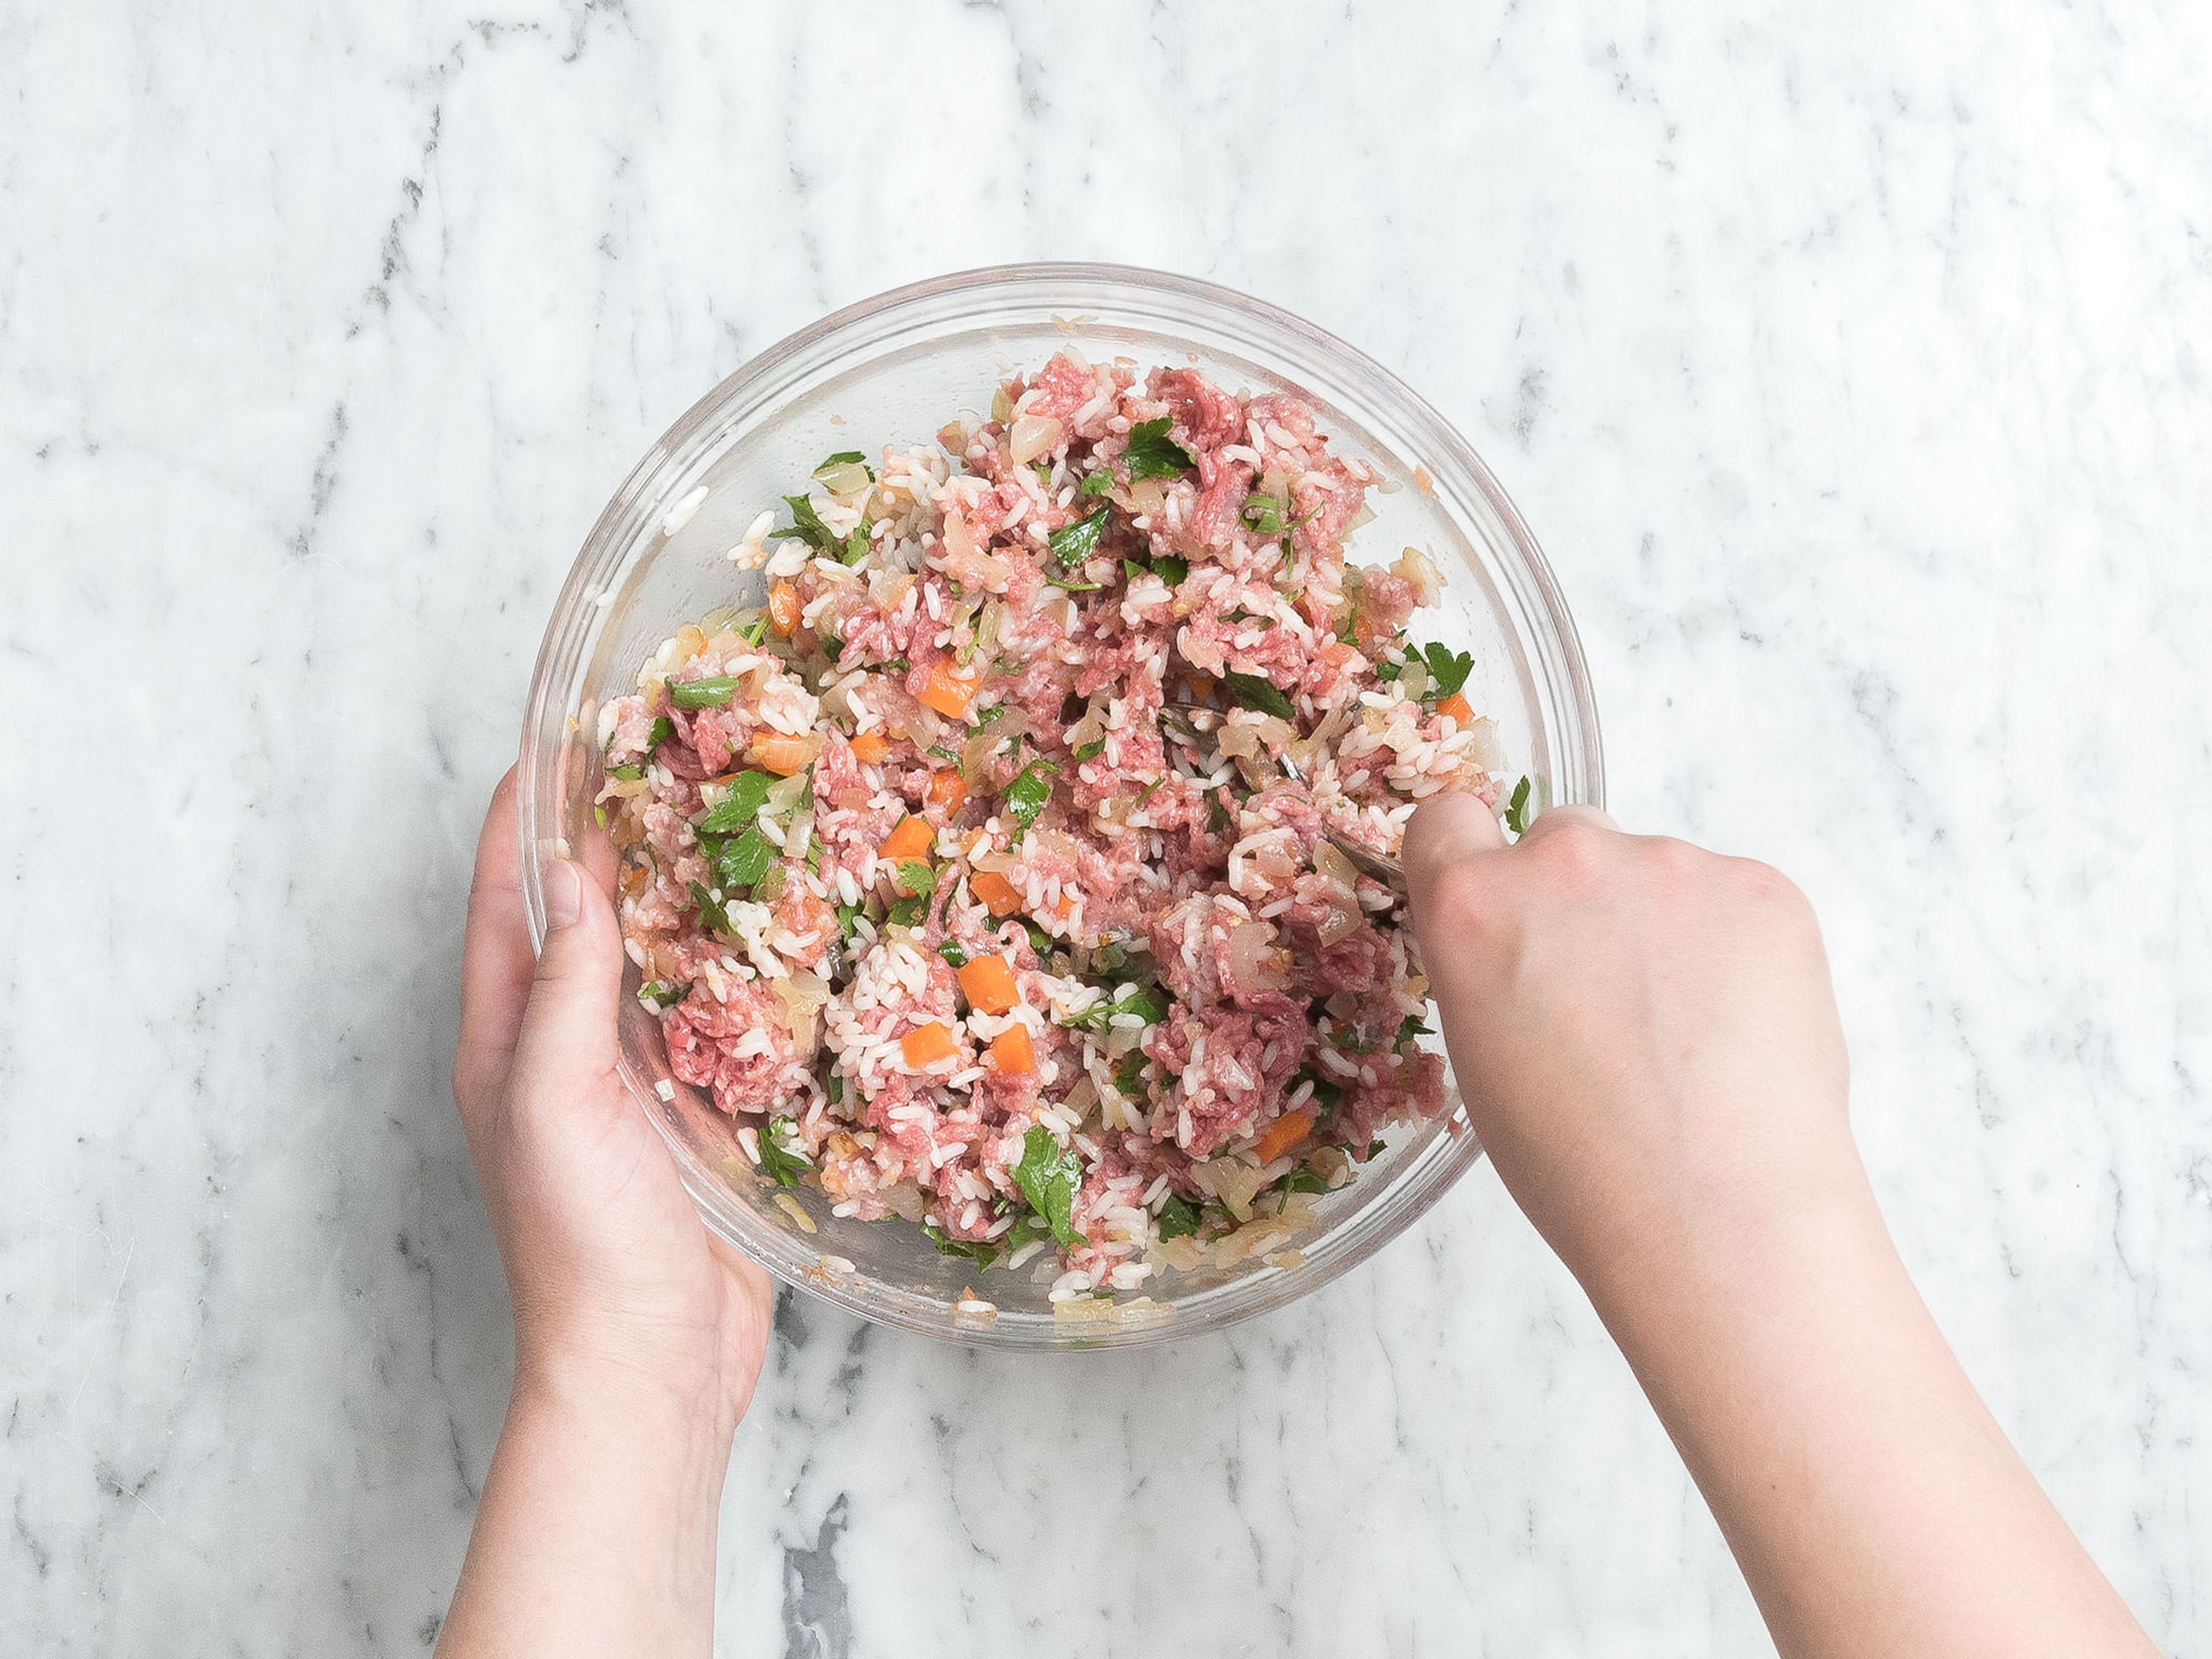 Add ground beef, ground pork, fried vegetables, parsley, half-cooked rice, and pureed tomatoes to a large bowl. Season with salt and pepper and stir to combine.